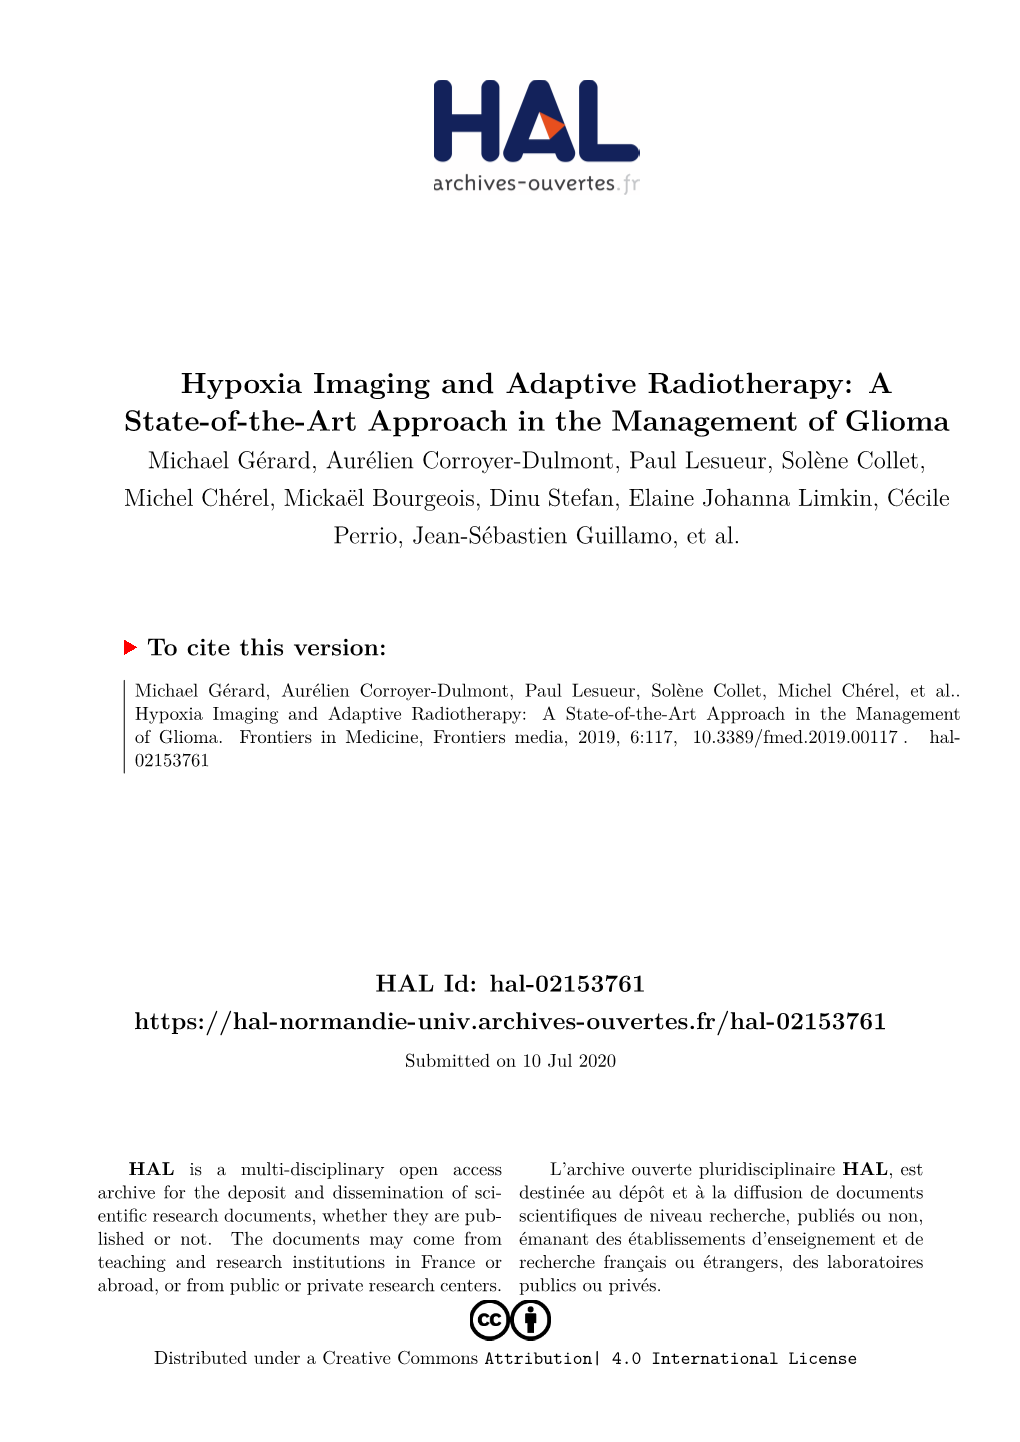 Hypoxia Imaging and Adaptive Radiotherapy